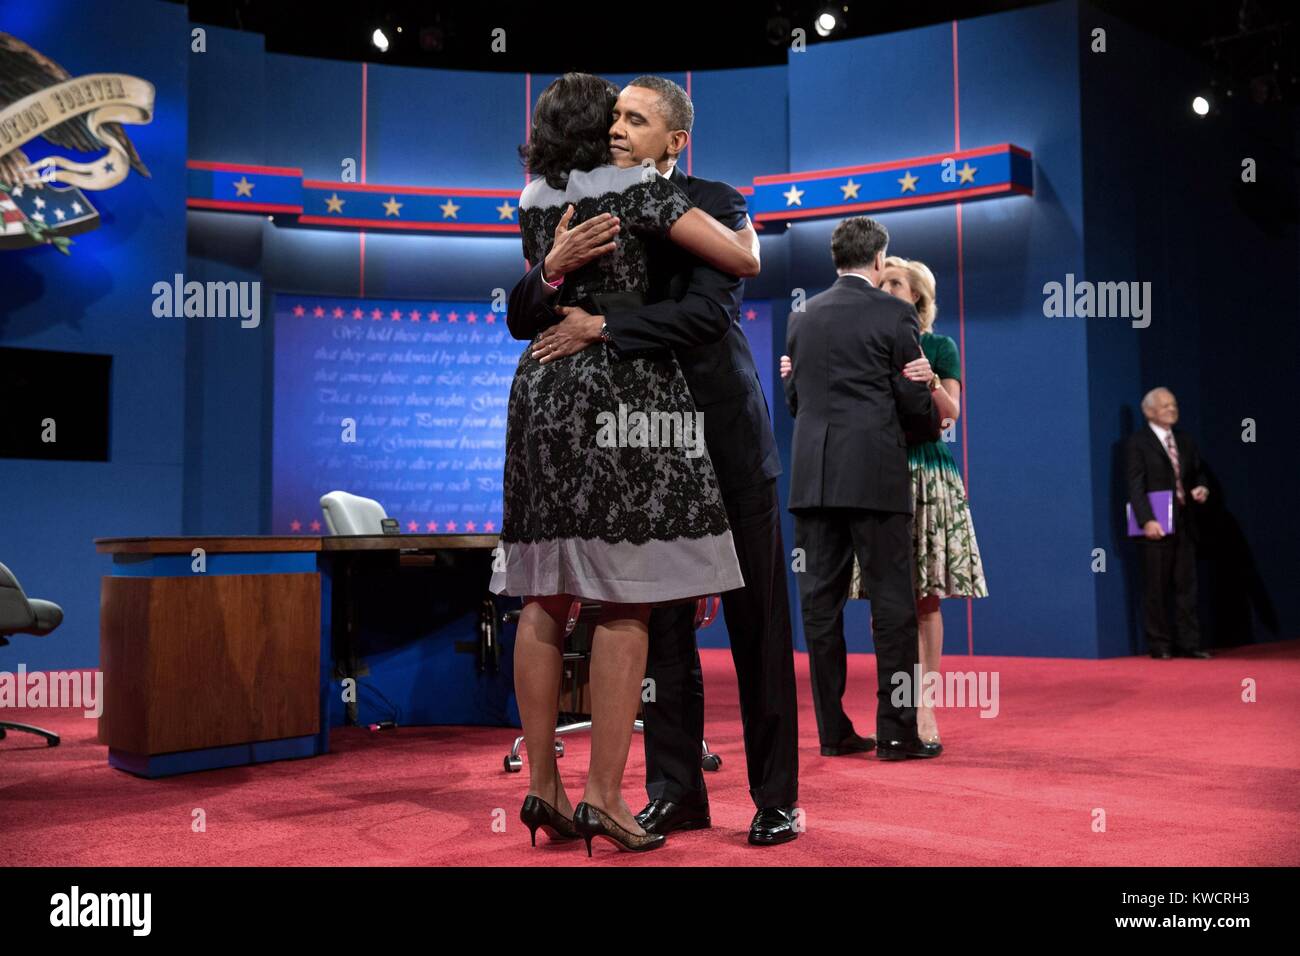 2012 Presidential nominees are embraced by their wives after the third presidential debate. Oct. 22, 2012. At Lynn University in Boca Raton, Florida, L-R: Michelle and President Barack Obama; Mitt and Anne Romney; debate moderator Bob Schieffer. (BSLOC 2015 3 27) Stock Photo